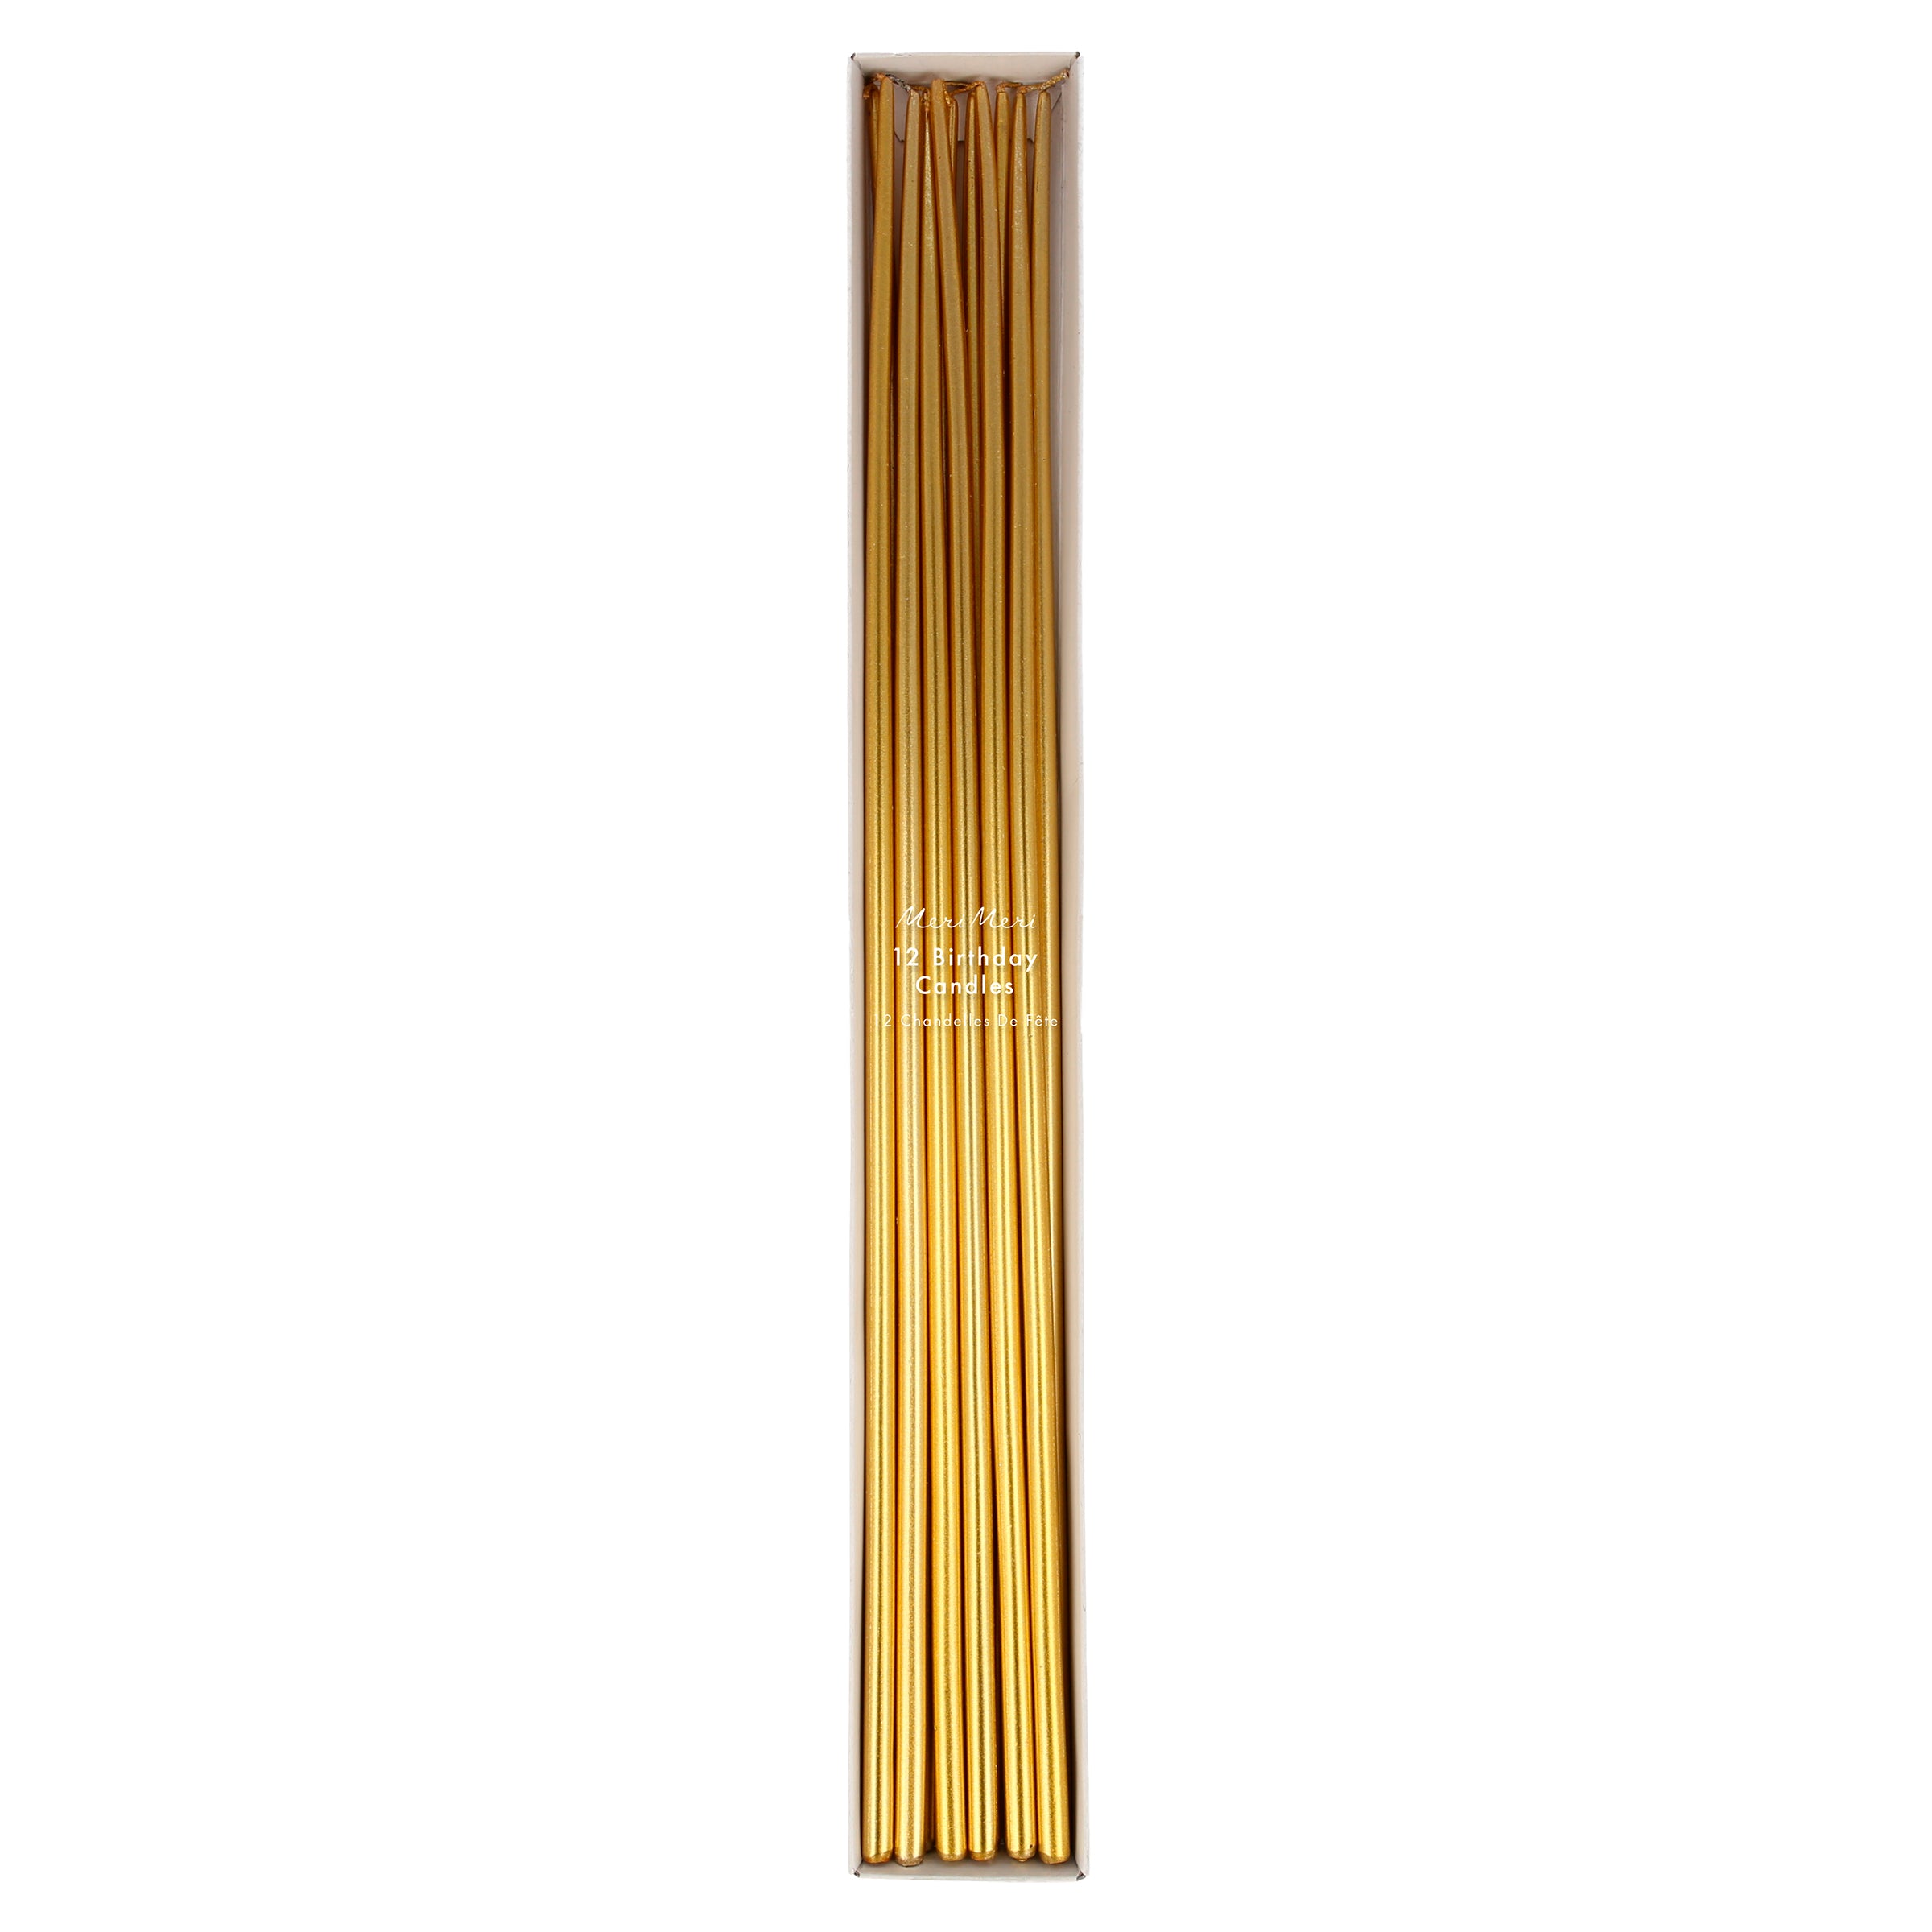 Our gold candles, with a tapered shape, are excellent as birthday cake decorations or whenever you want tall candles.